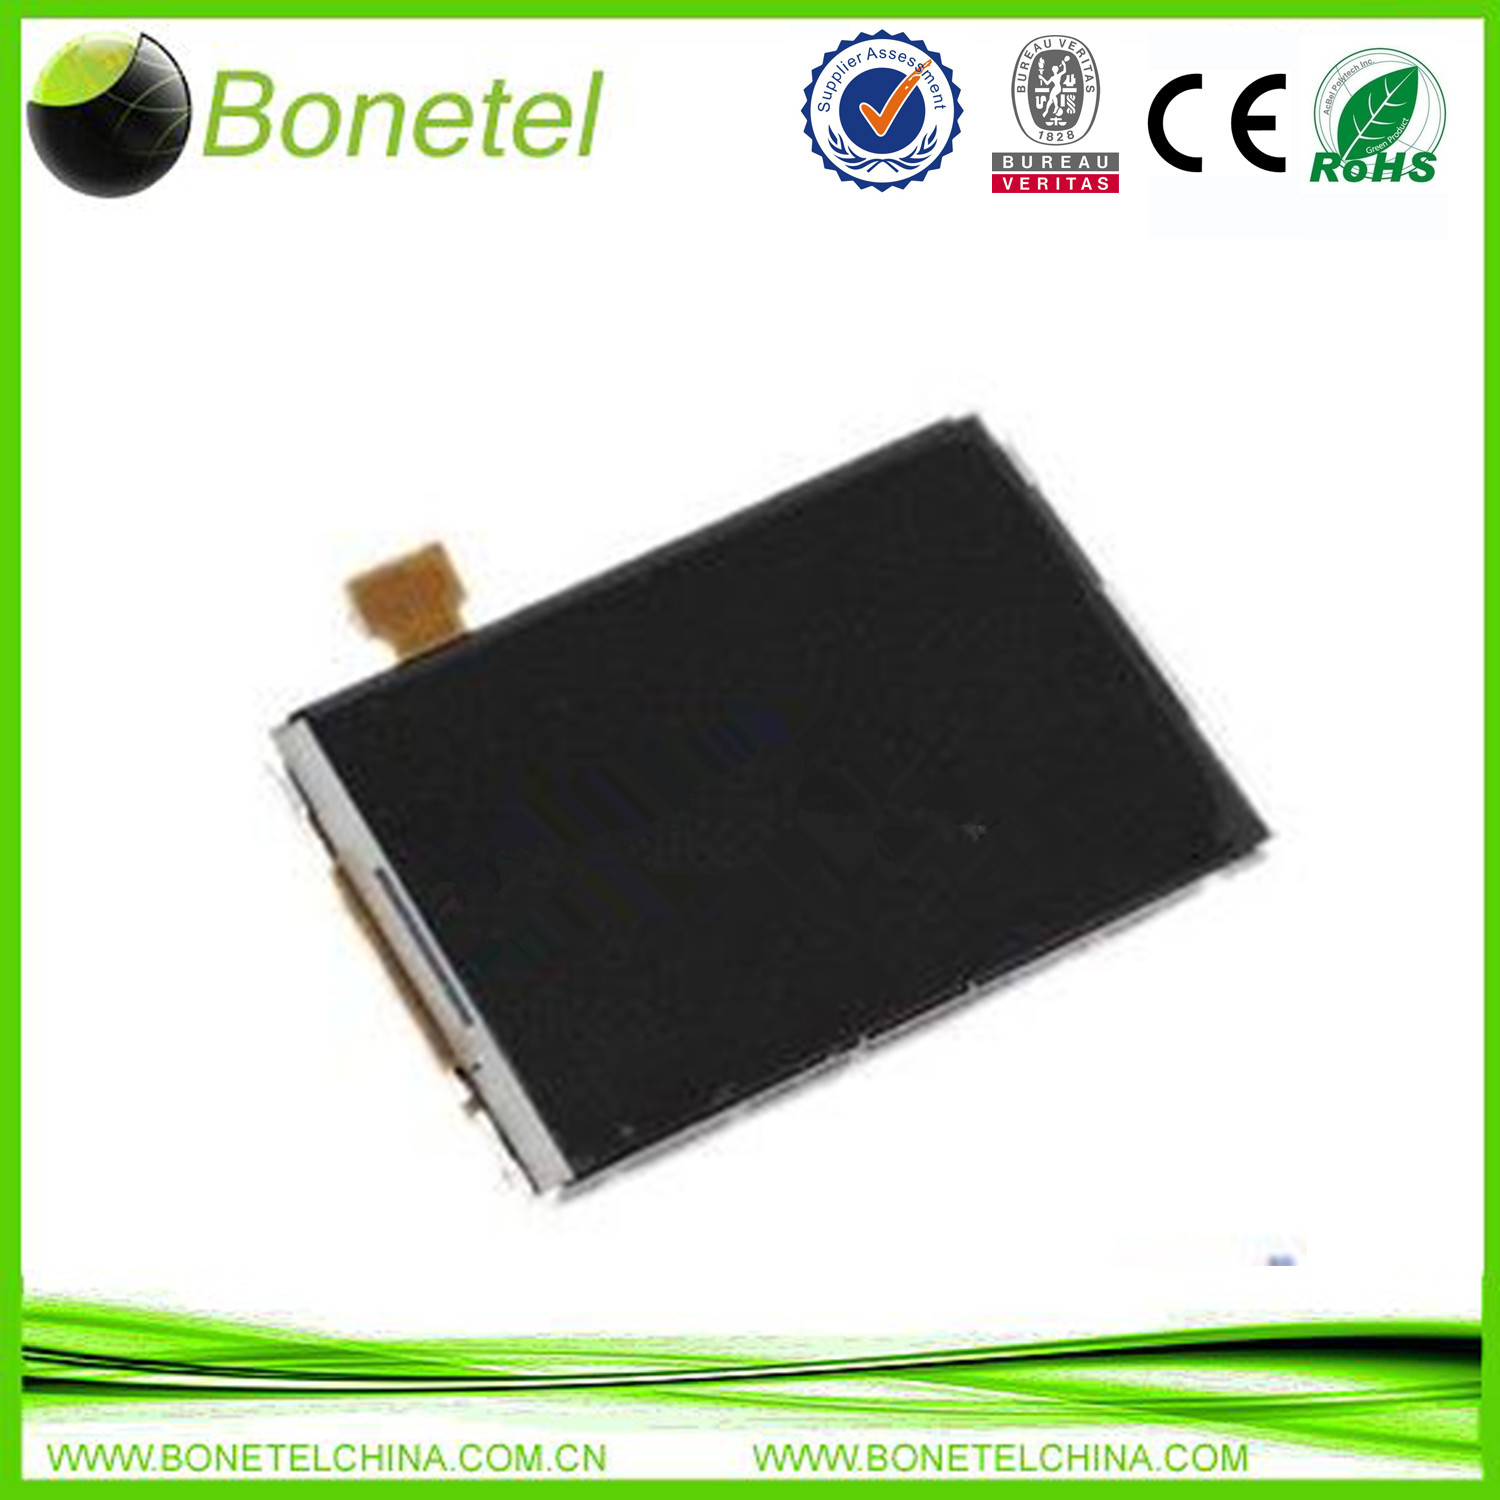 LCD Display Screen Replace For Samsung S3770 Champ 3.5G